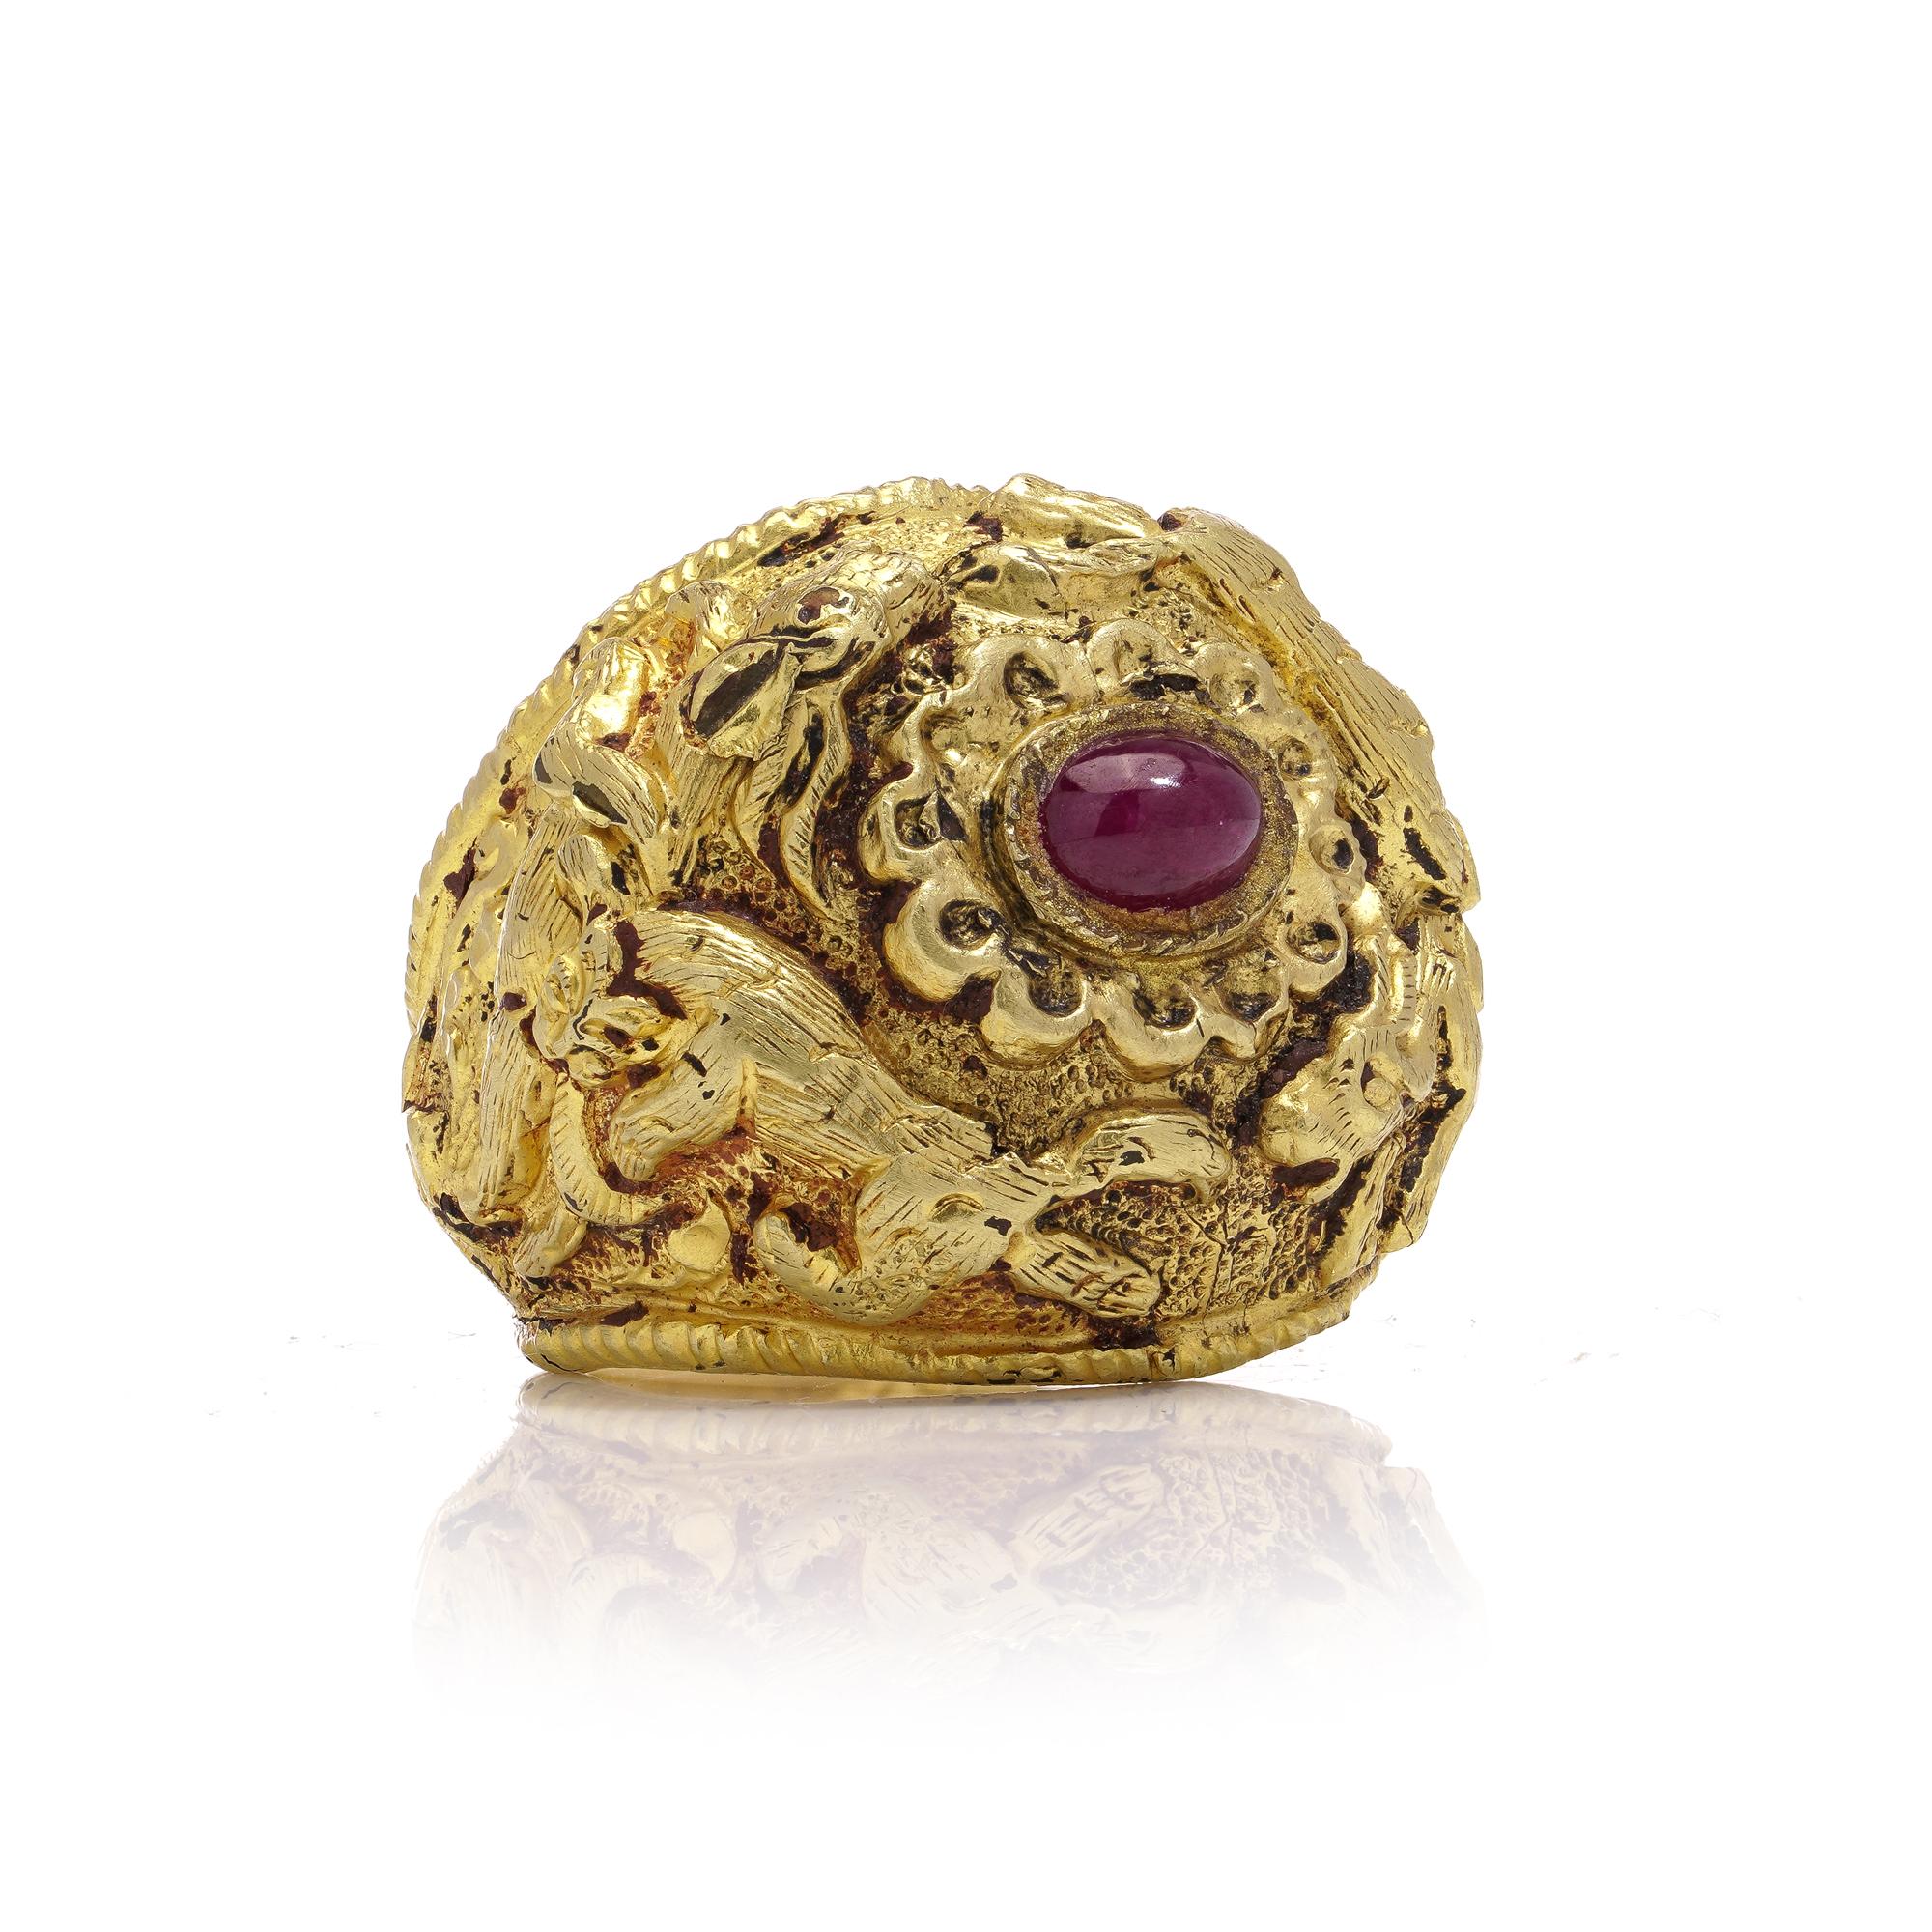 A 20kt yellow gold ring from ancient Thailand features a central ruby surrounded by depictions of hunting scenes. The scenes include leopards hunting rabbits and oxen. X-ray analysis revealed that the ring is made of 20kt gold with a blend of